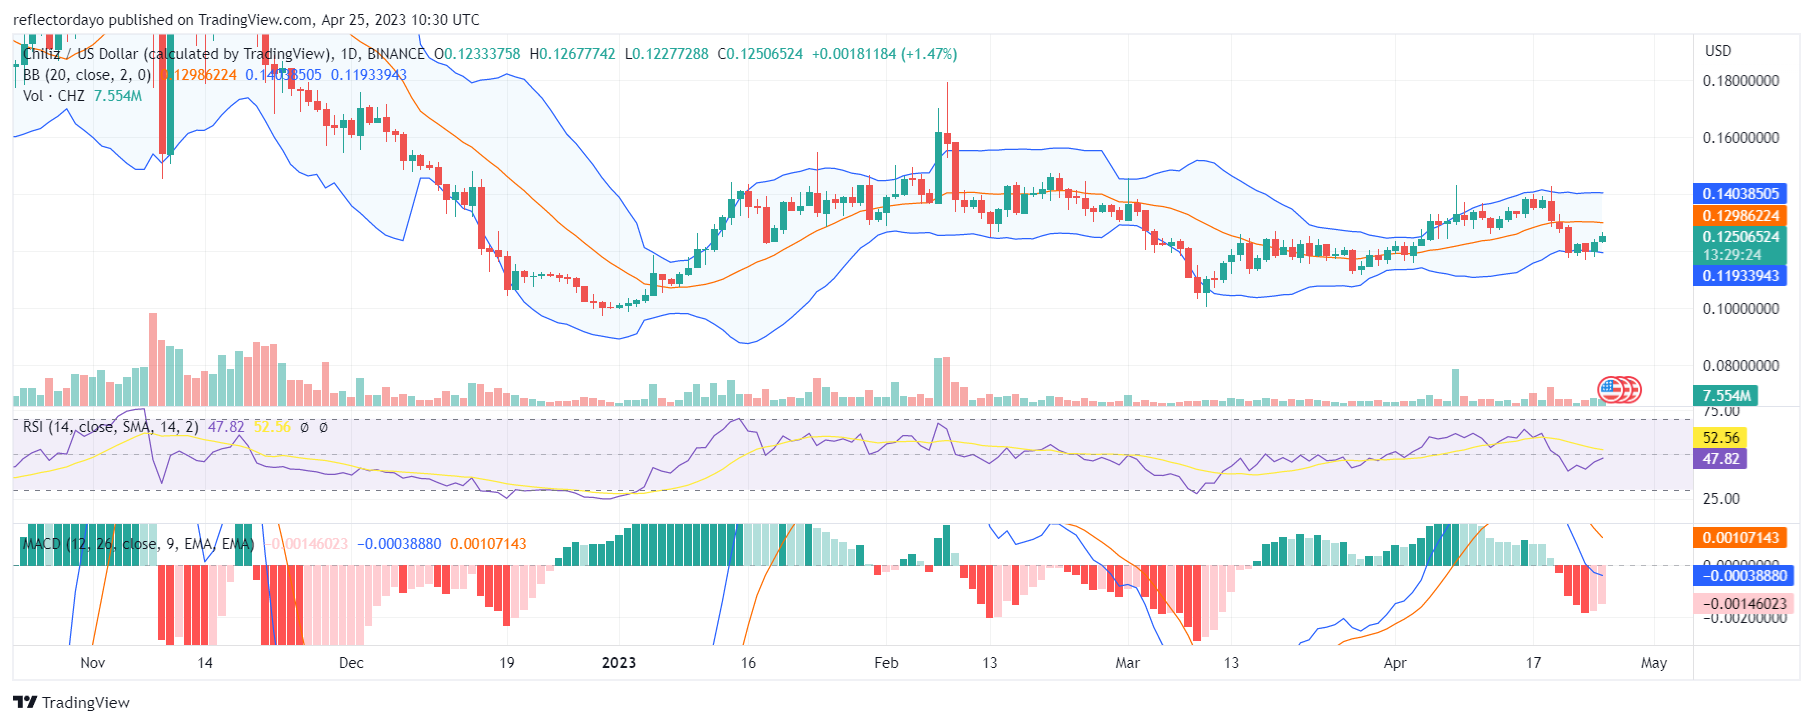 Chiliz (Chz/USD) To Start Trending up From $0.120